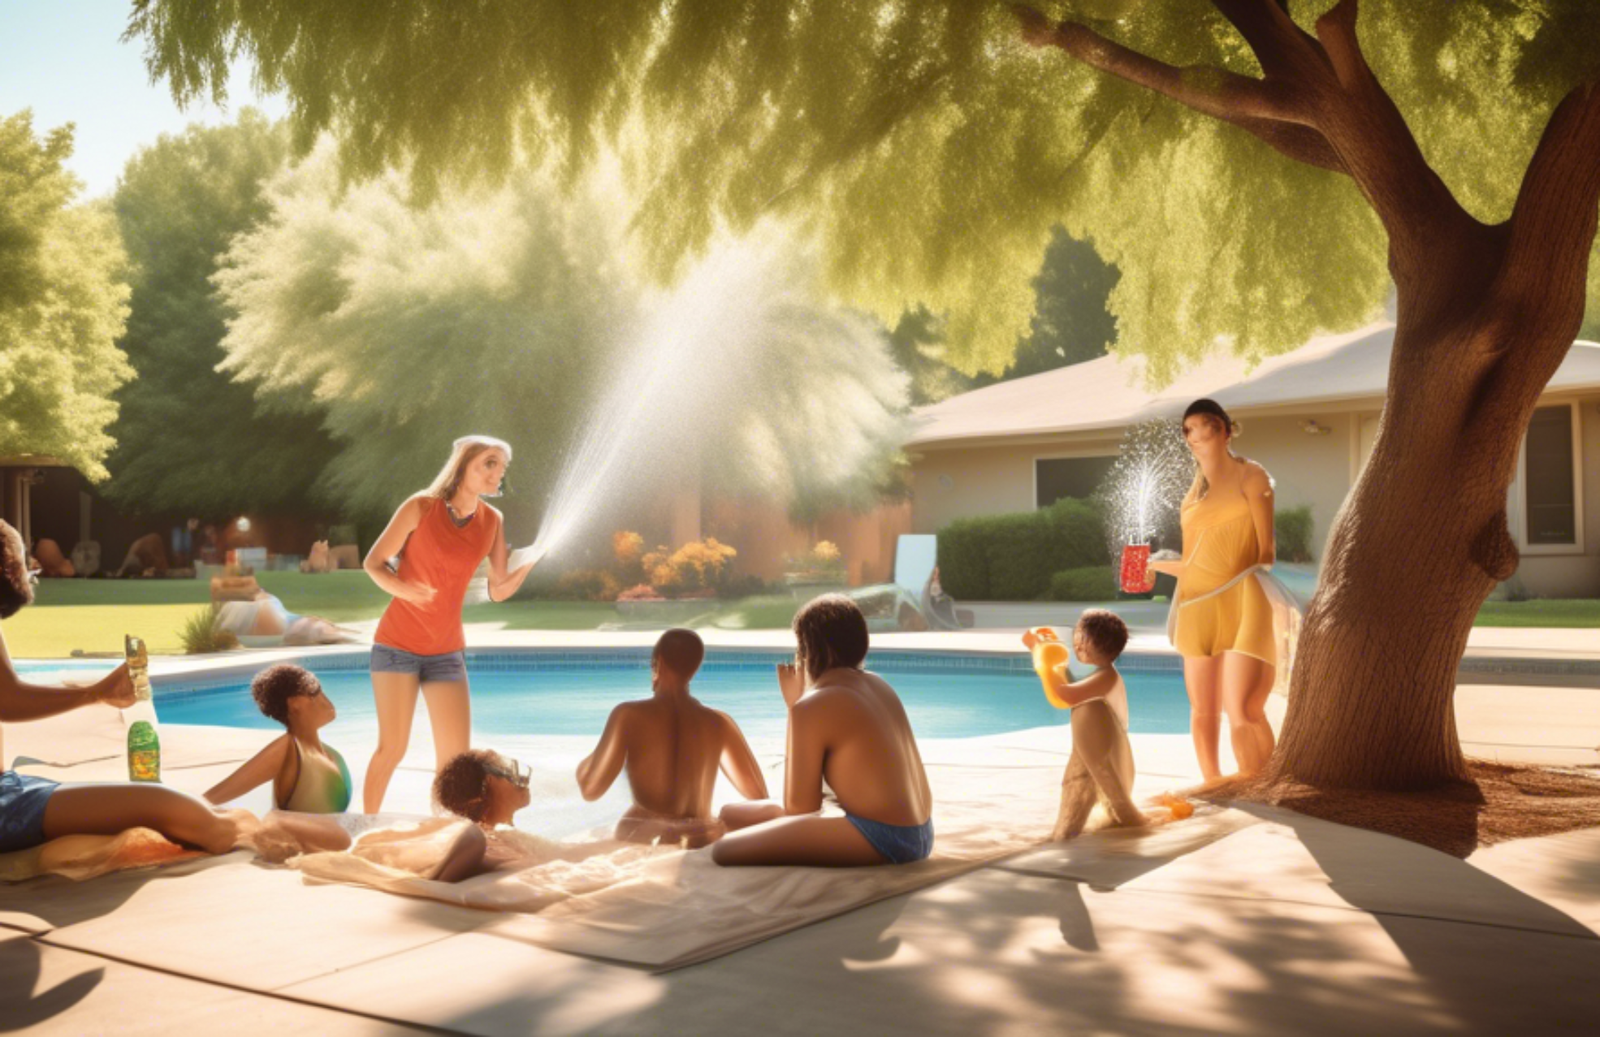 Create an image that depicts various methods of staying cool during a hot summer day. Show a diverse group of people engaging in activities such as swimming in a pool, relaxing under the shade of a large tree, enjoying ice-cold beverages, using fans and air conditioners indoors, wearing light and breathable clothing, and playing with a sprinkler in a backyard. Ensure the scene is bright, vibrant, and captures the essence of summer.